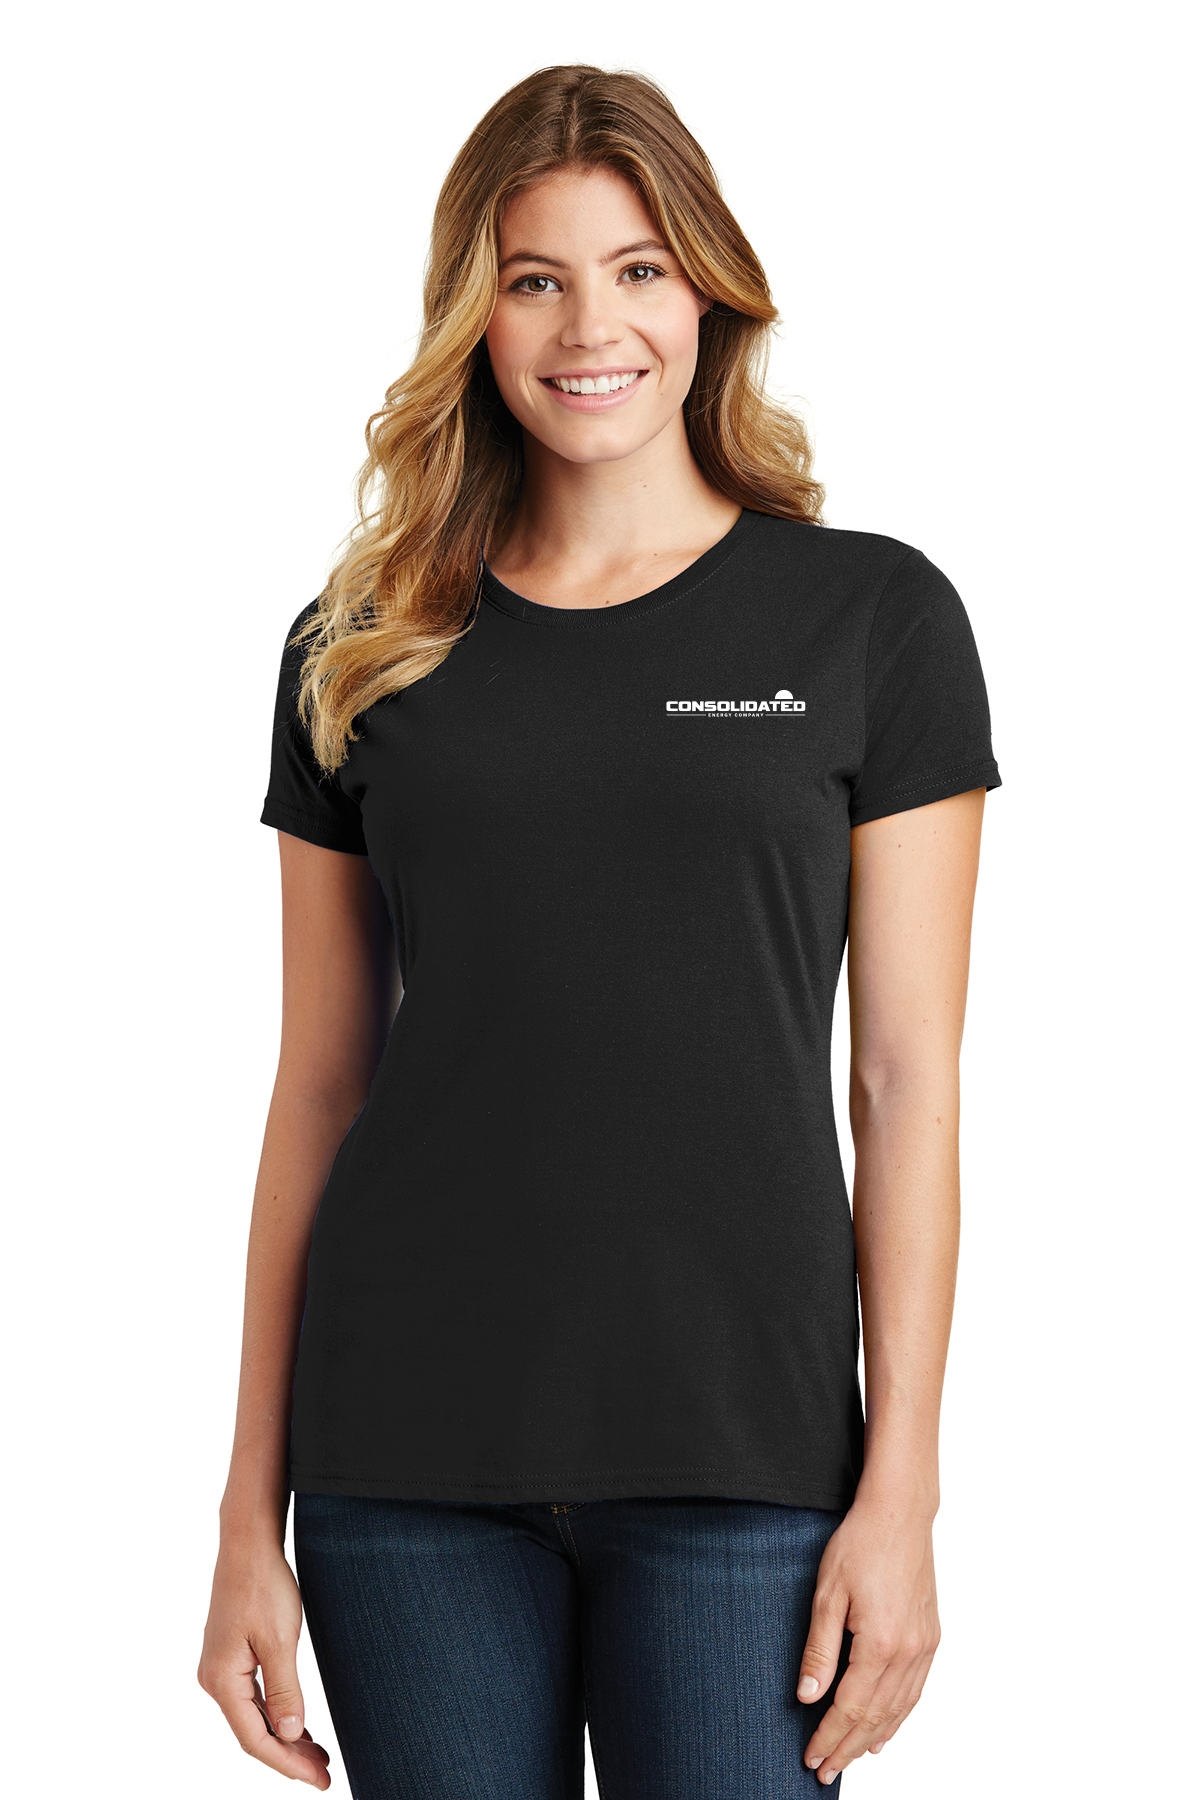 Consolidated Energy Company Ladies T-Shirt